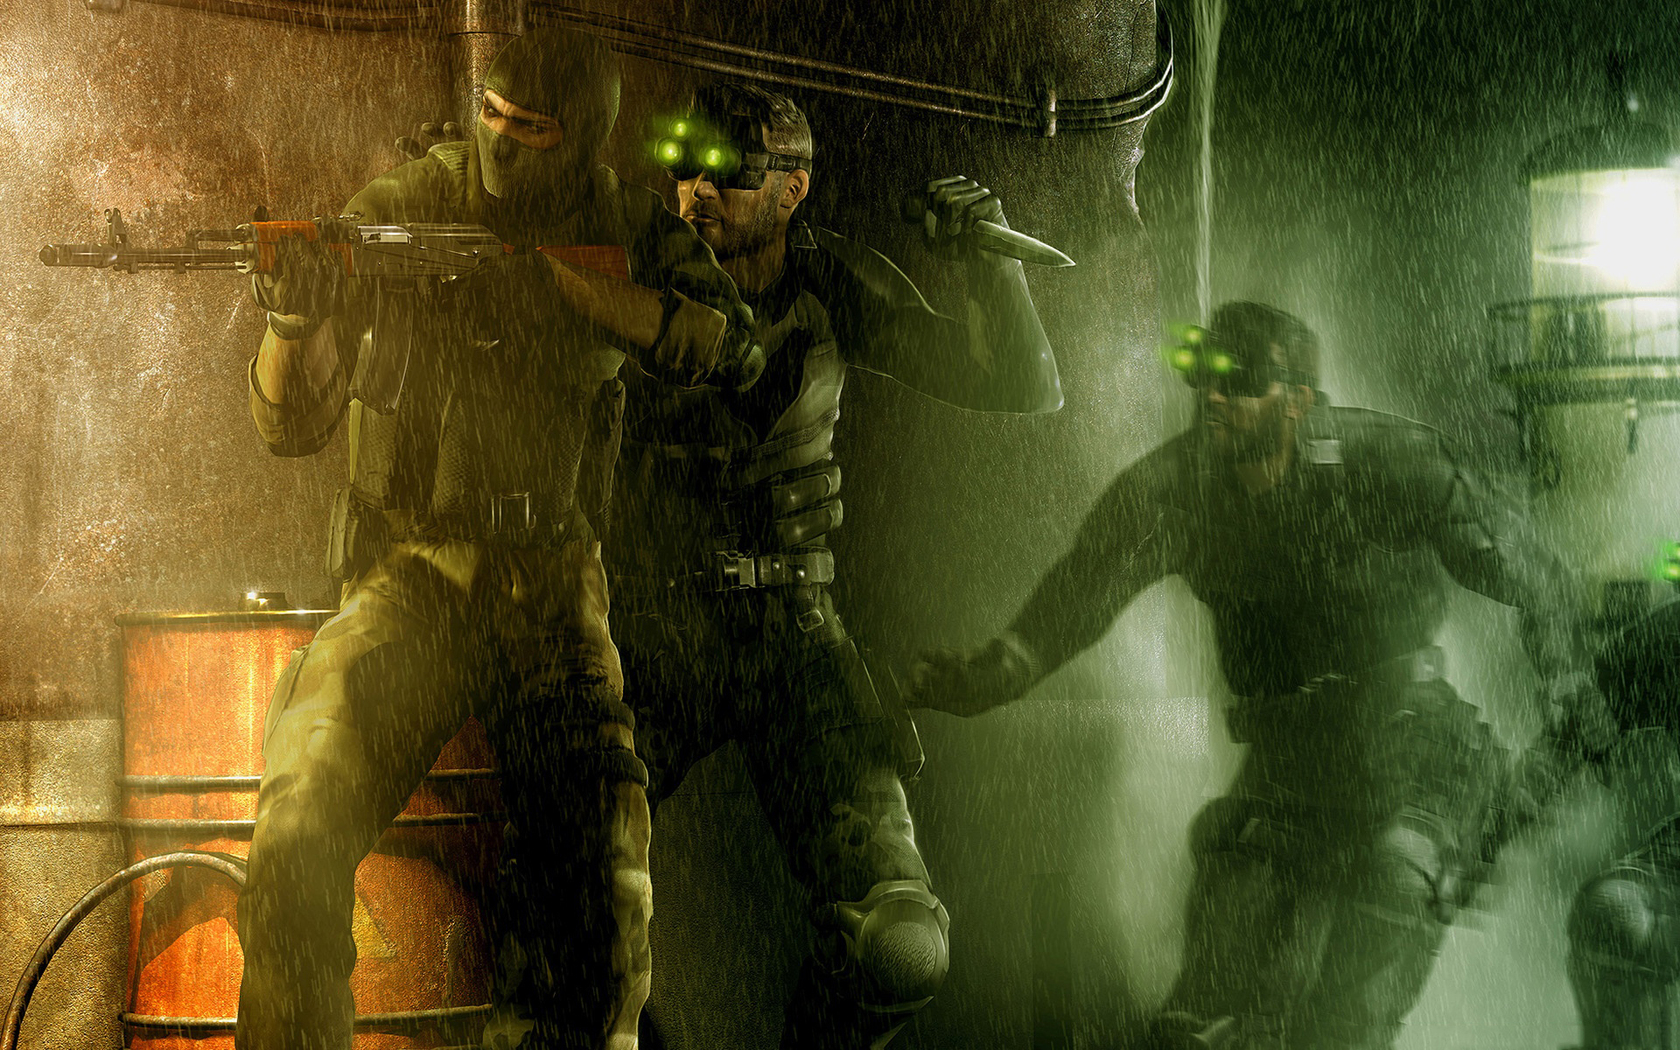 tom clancy, Splinter cell, Splinter, Cell, Military, Warriors, Soldiers, Weaponsgames, Video games Wallpaper